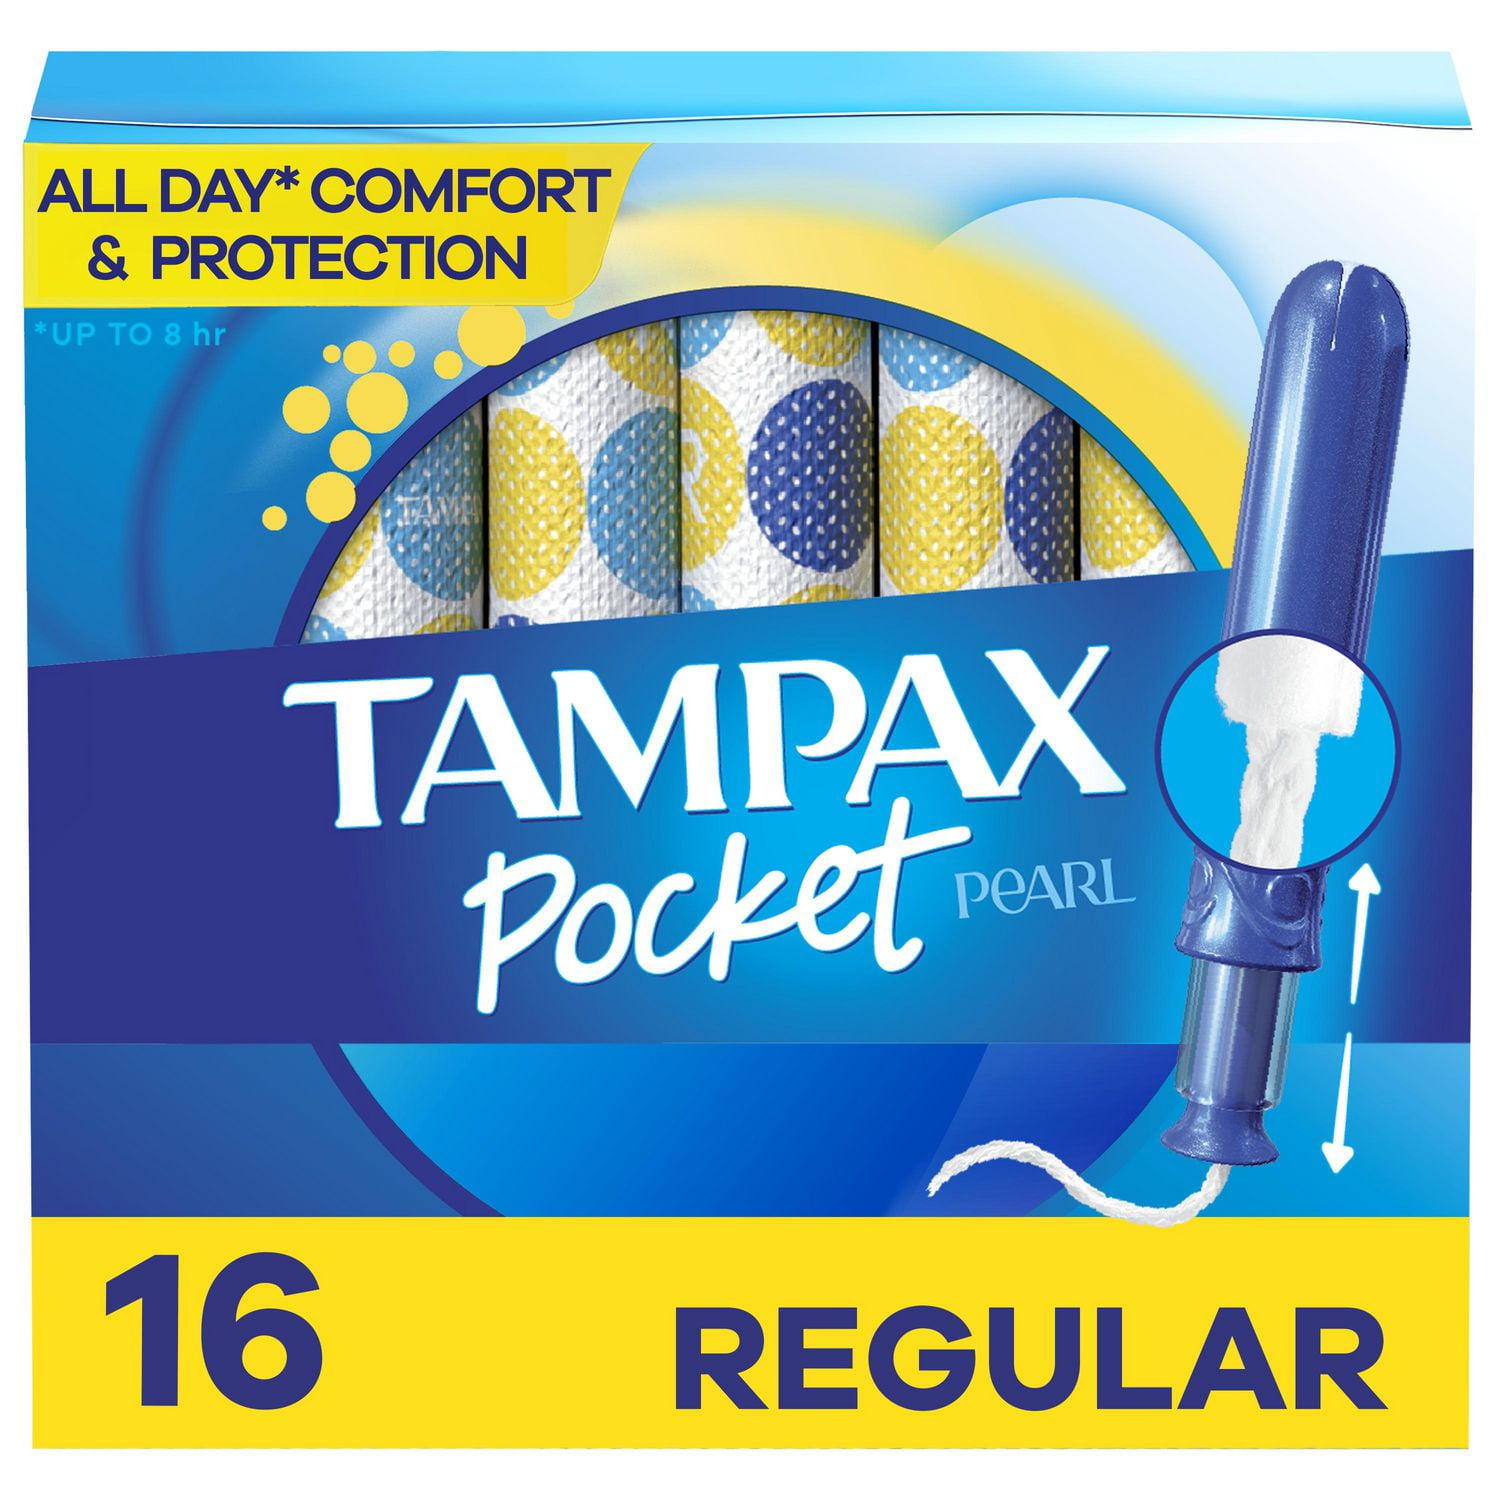 Playtex Sport Regular Absorbency Compact Tampons with Flex-Fit Technology  (Pack of 2) Tampons, Buy Women Hygiene products online in India